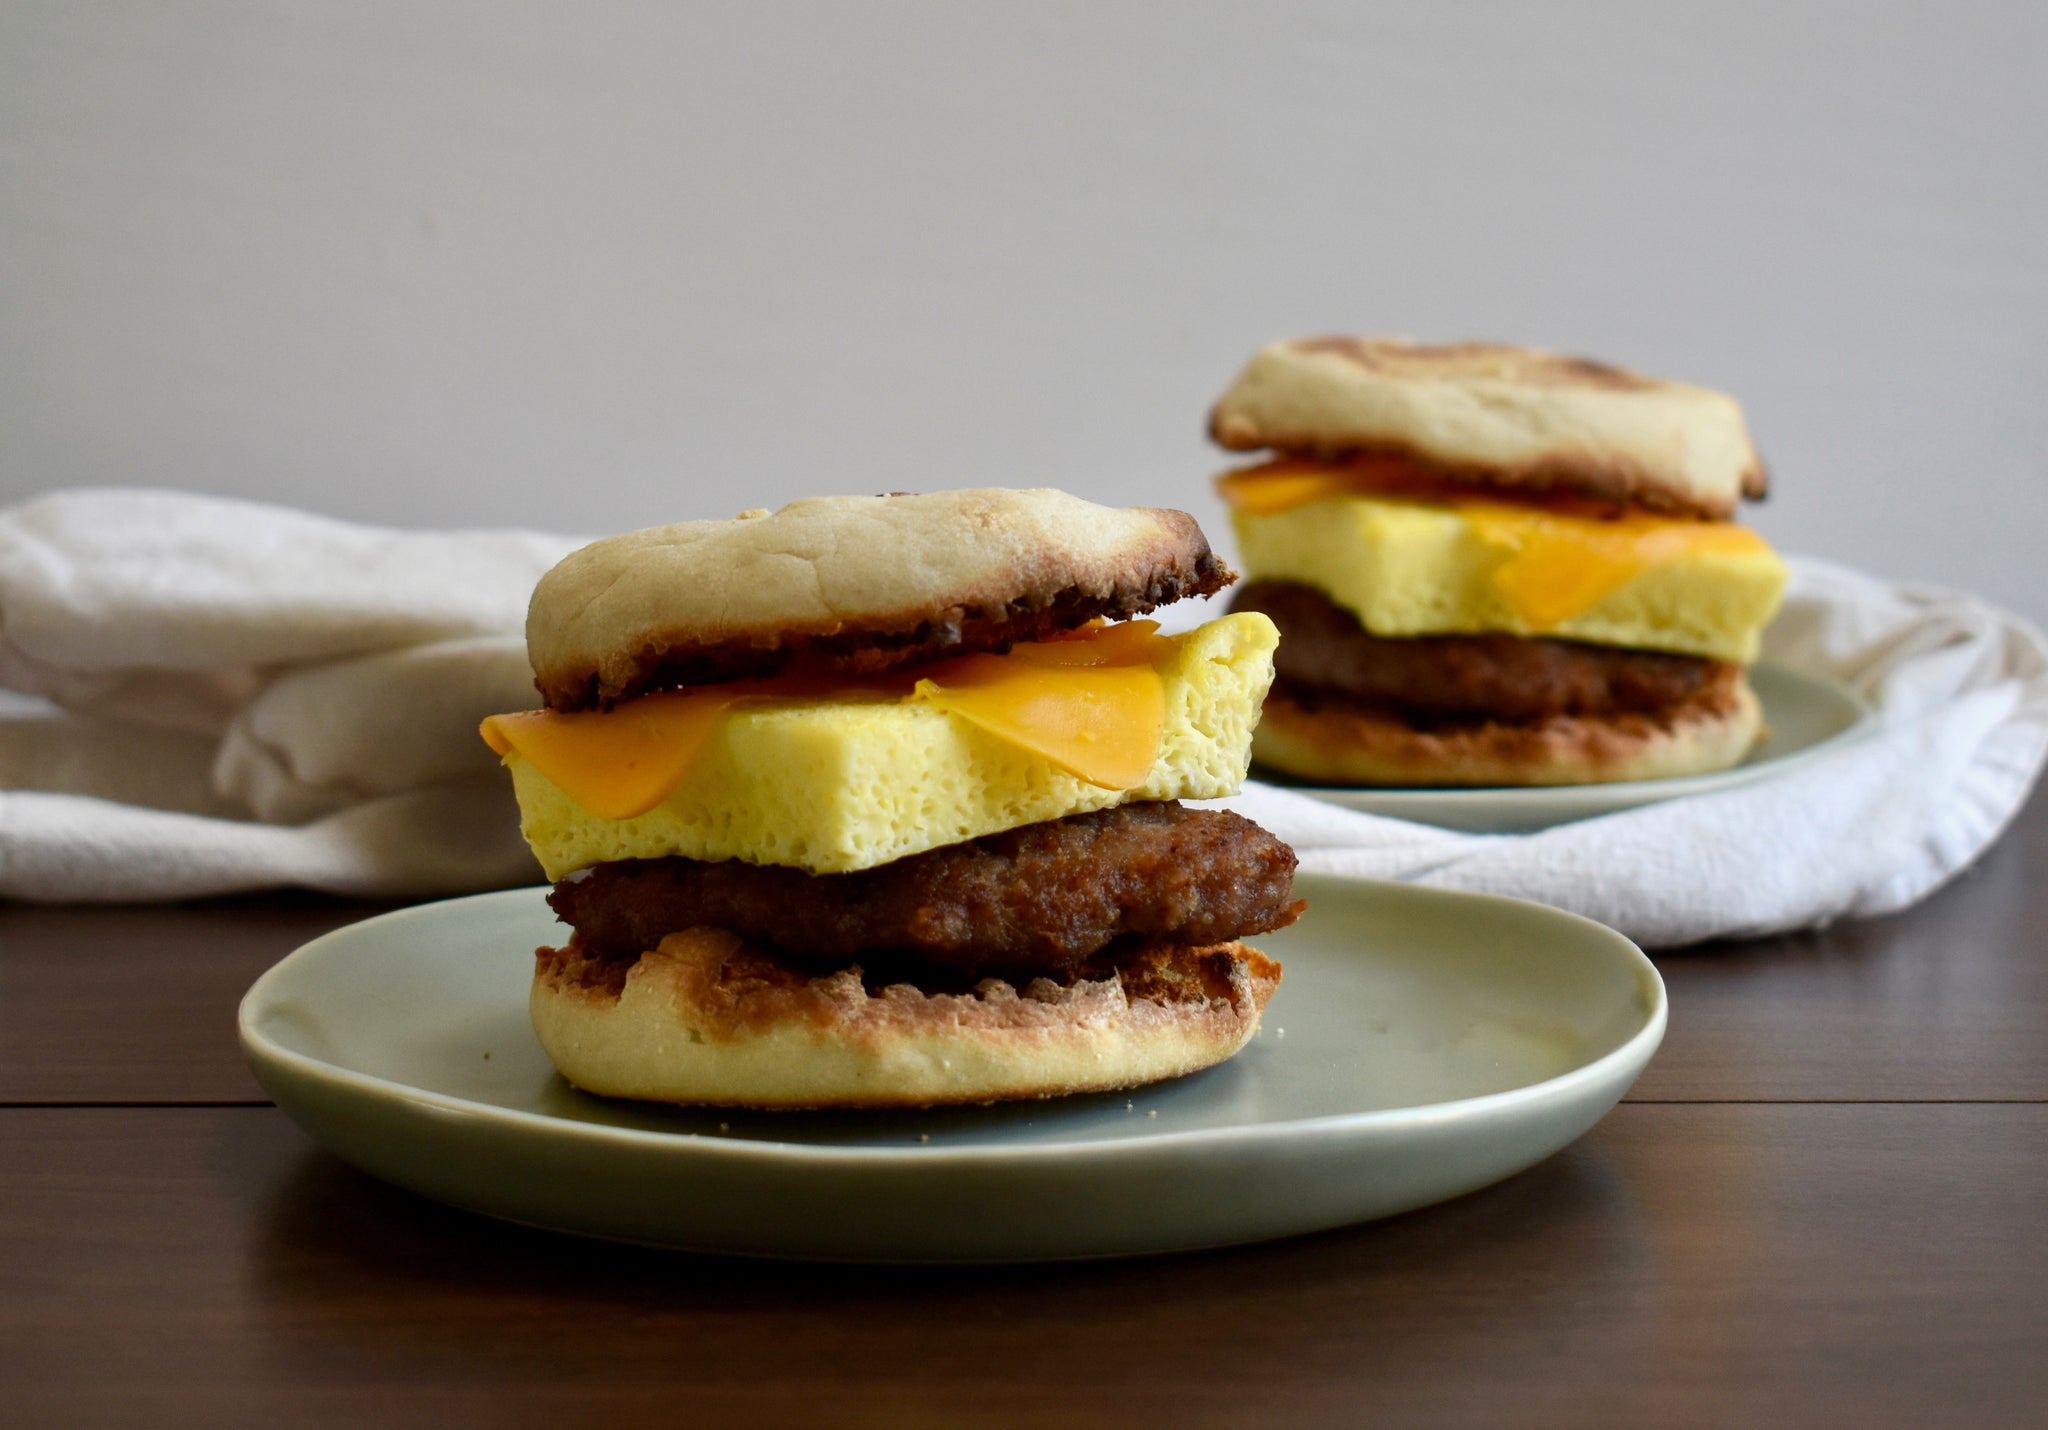 Make-Ahead Sausage, Egg, and Cheese Breakfast Sandwiches – The Creamery